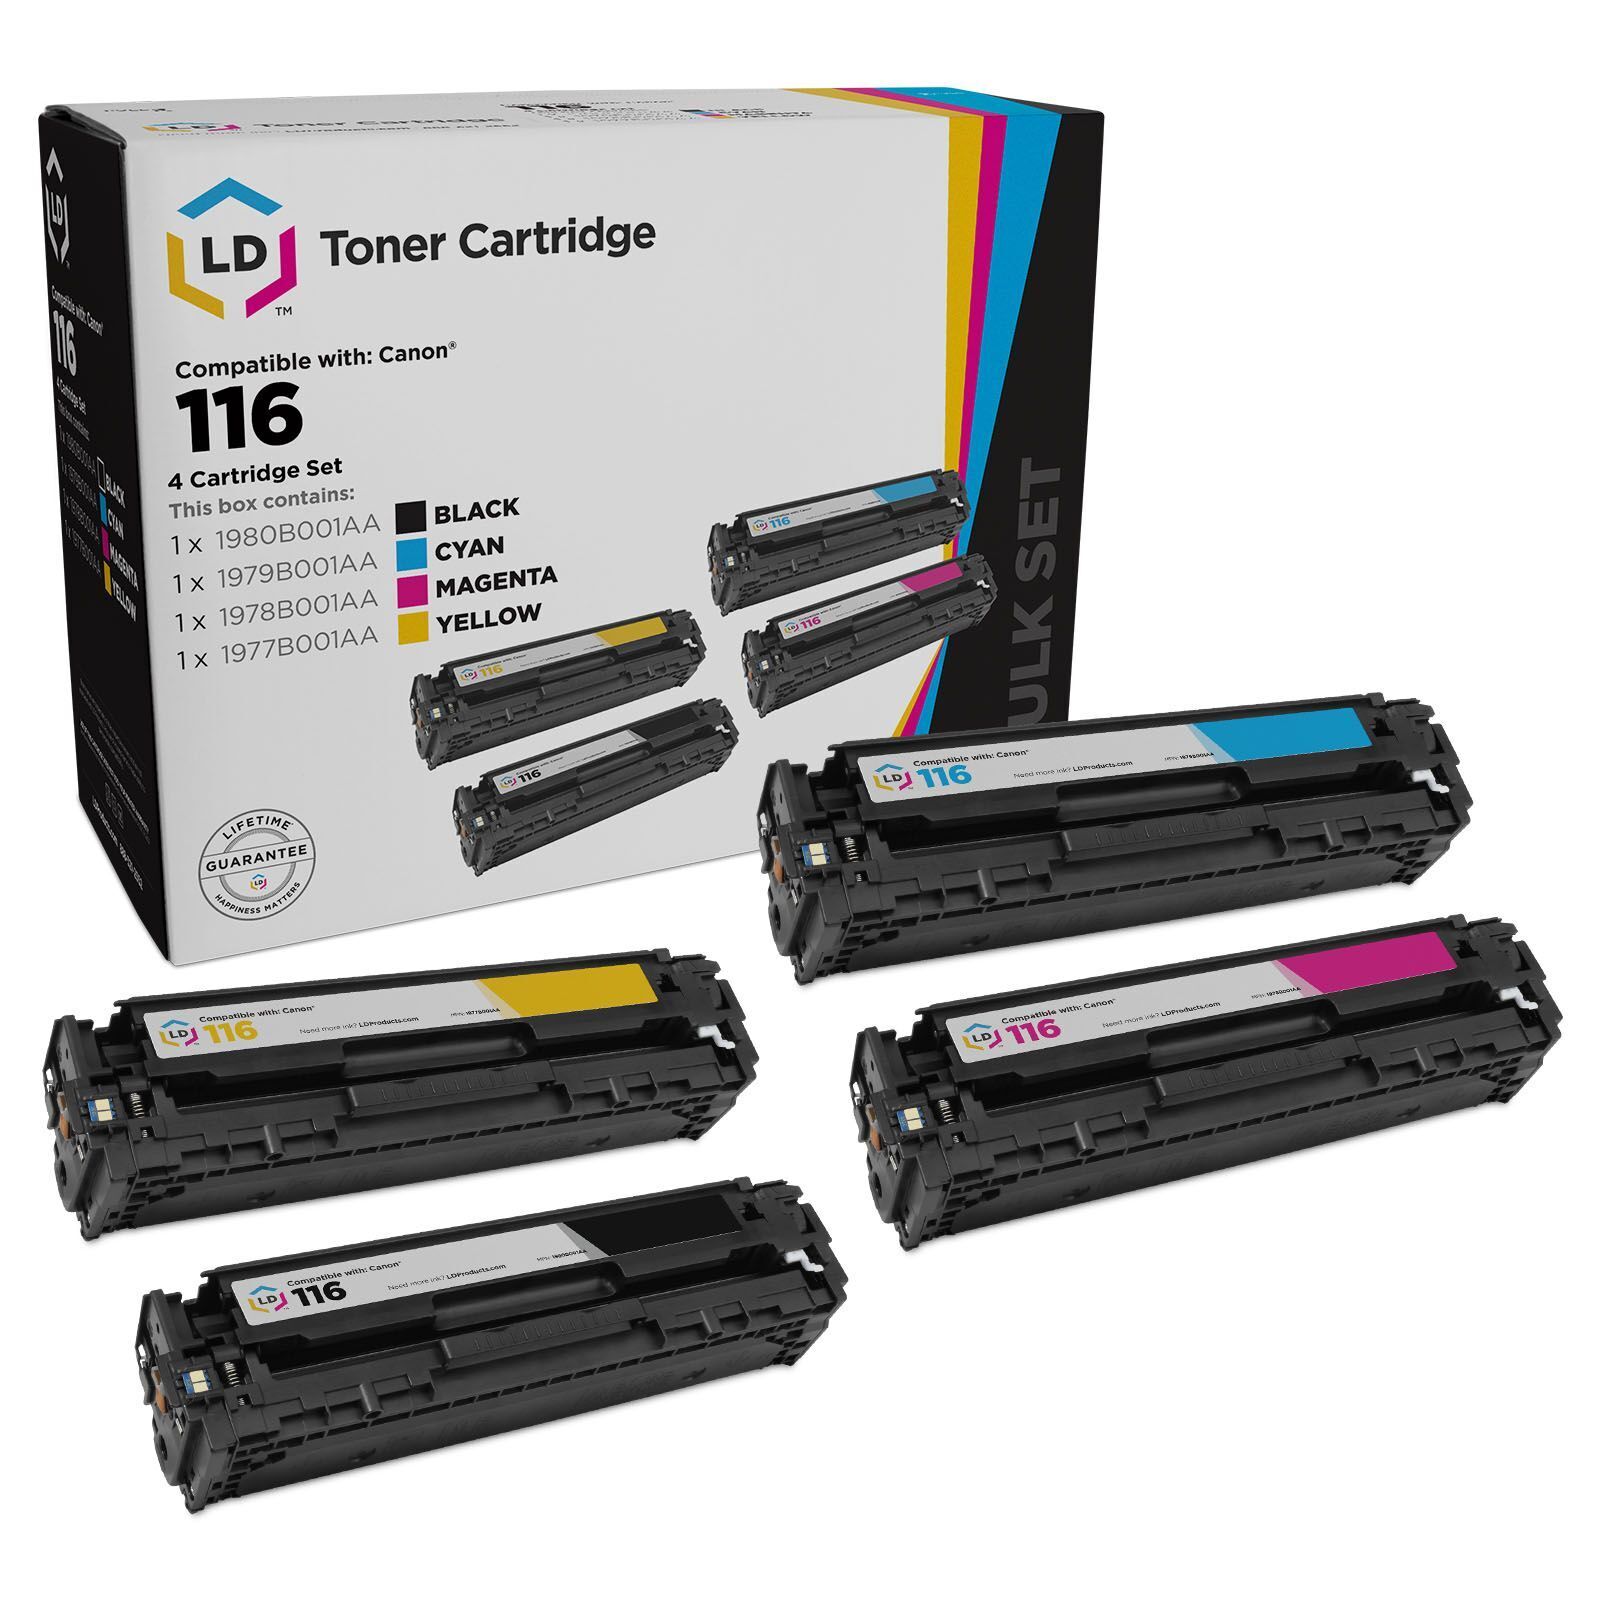 LD Products Replacement Toner Set for Canon 116 Black, Cyan, Magenta, Yellow 4PK